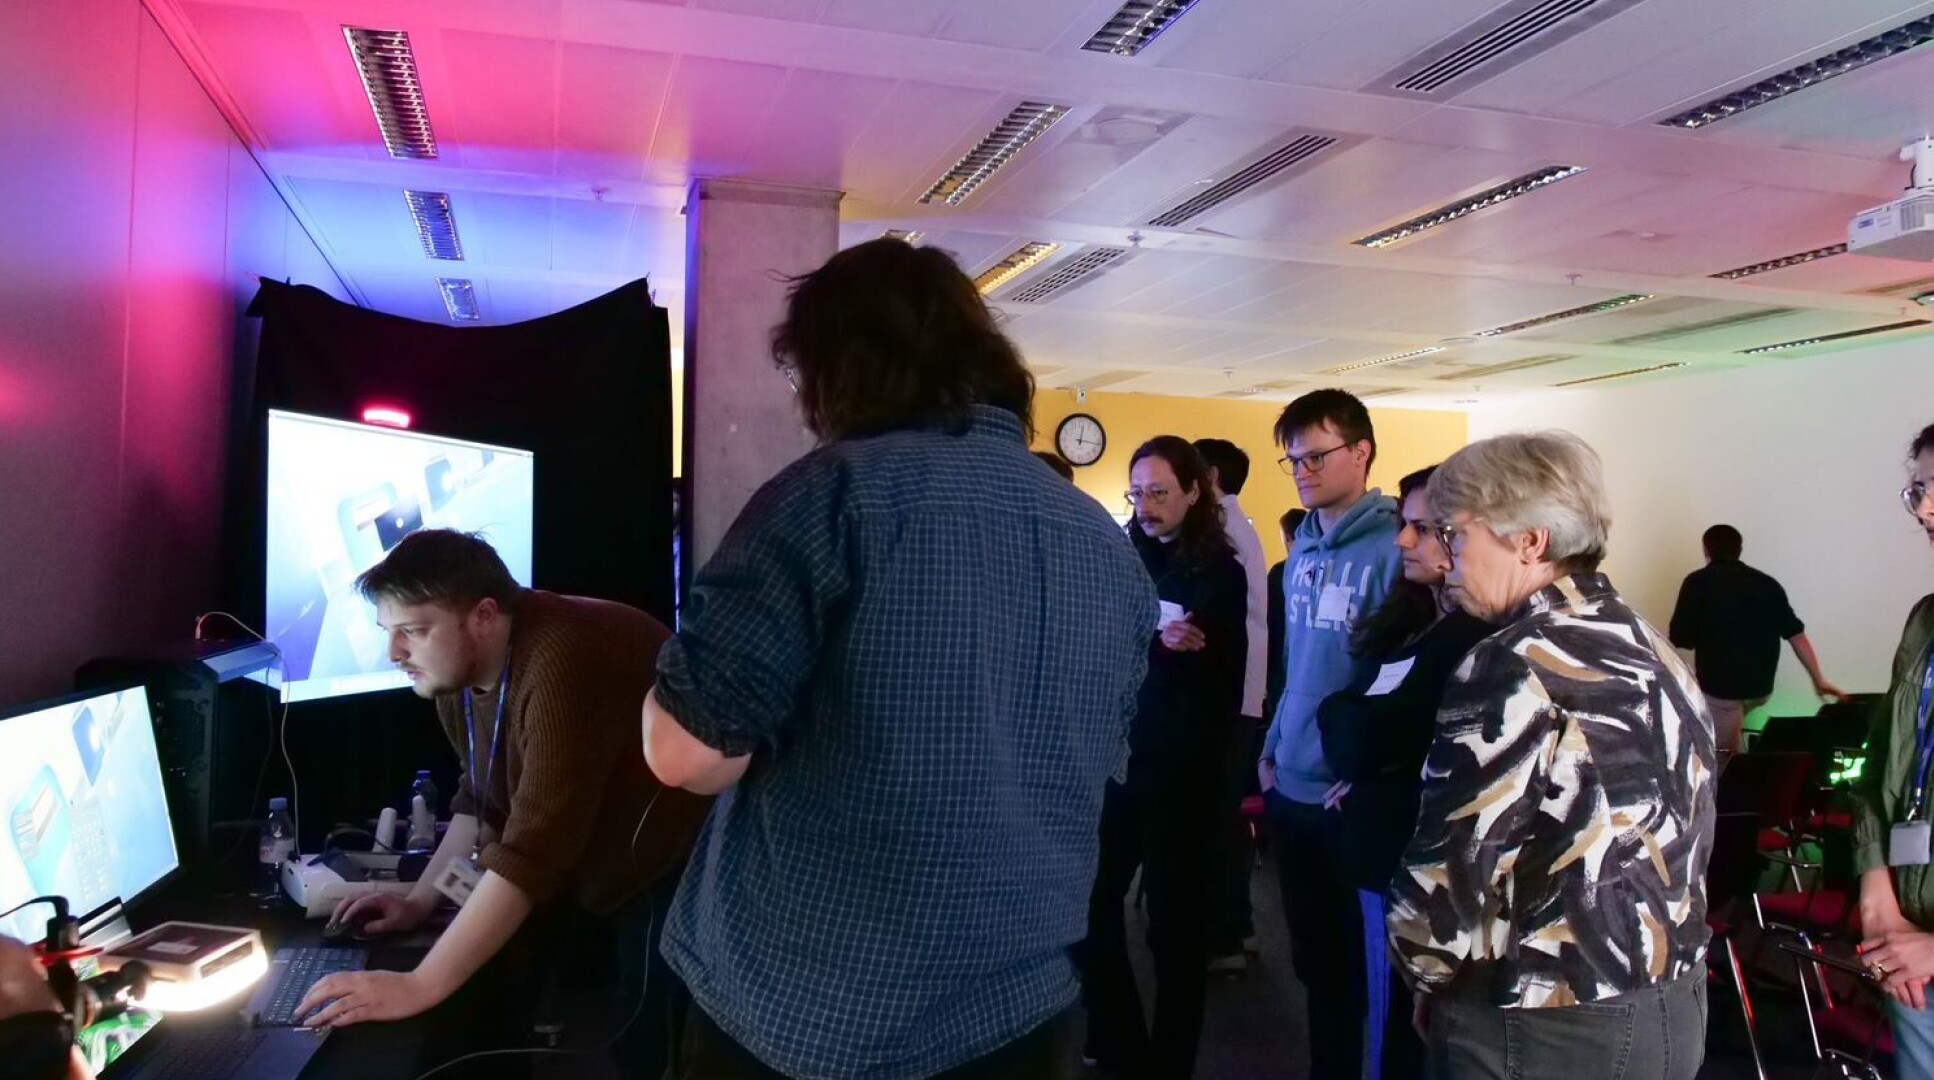 Delegates gather around an immersive learning experience on a digital screen